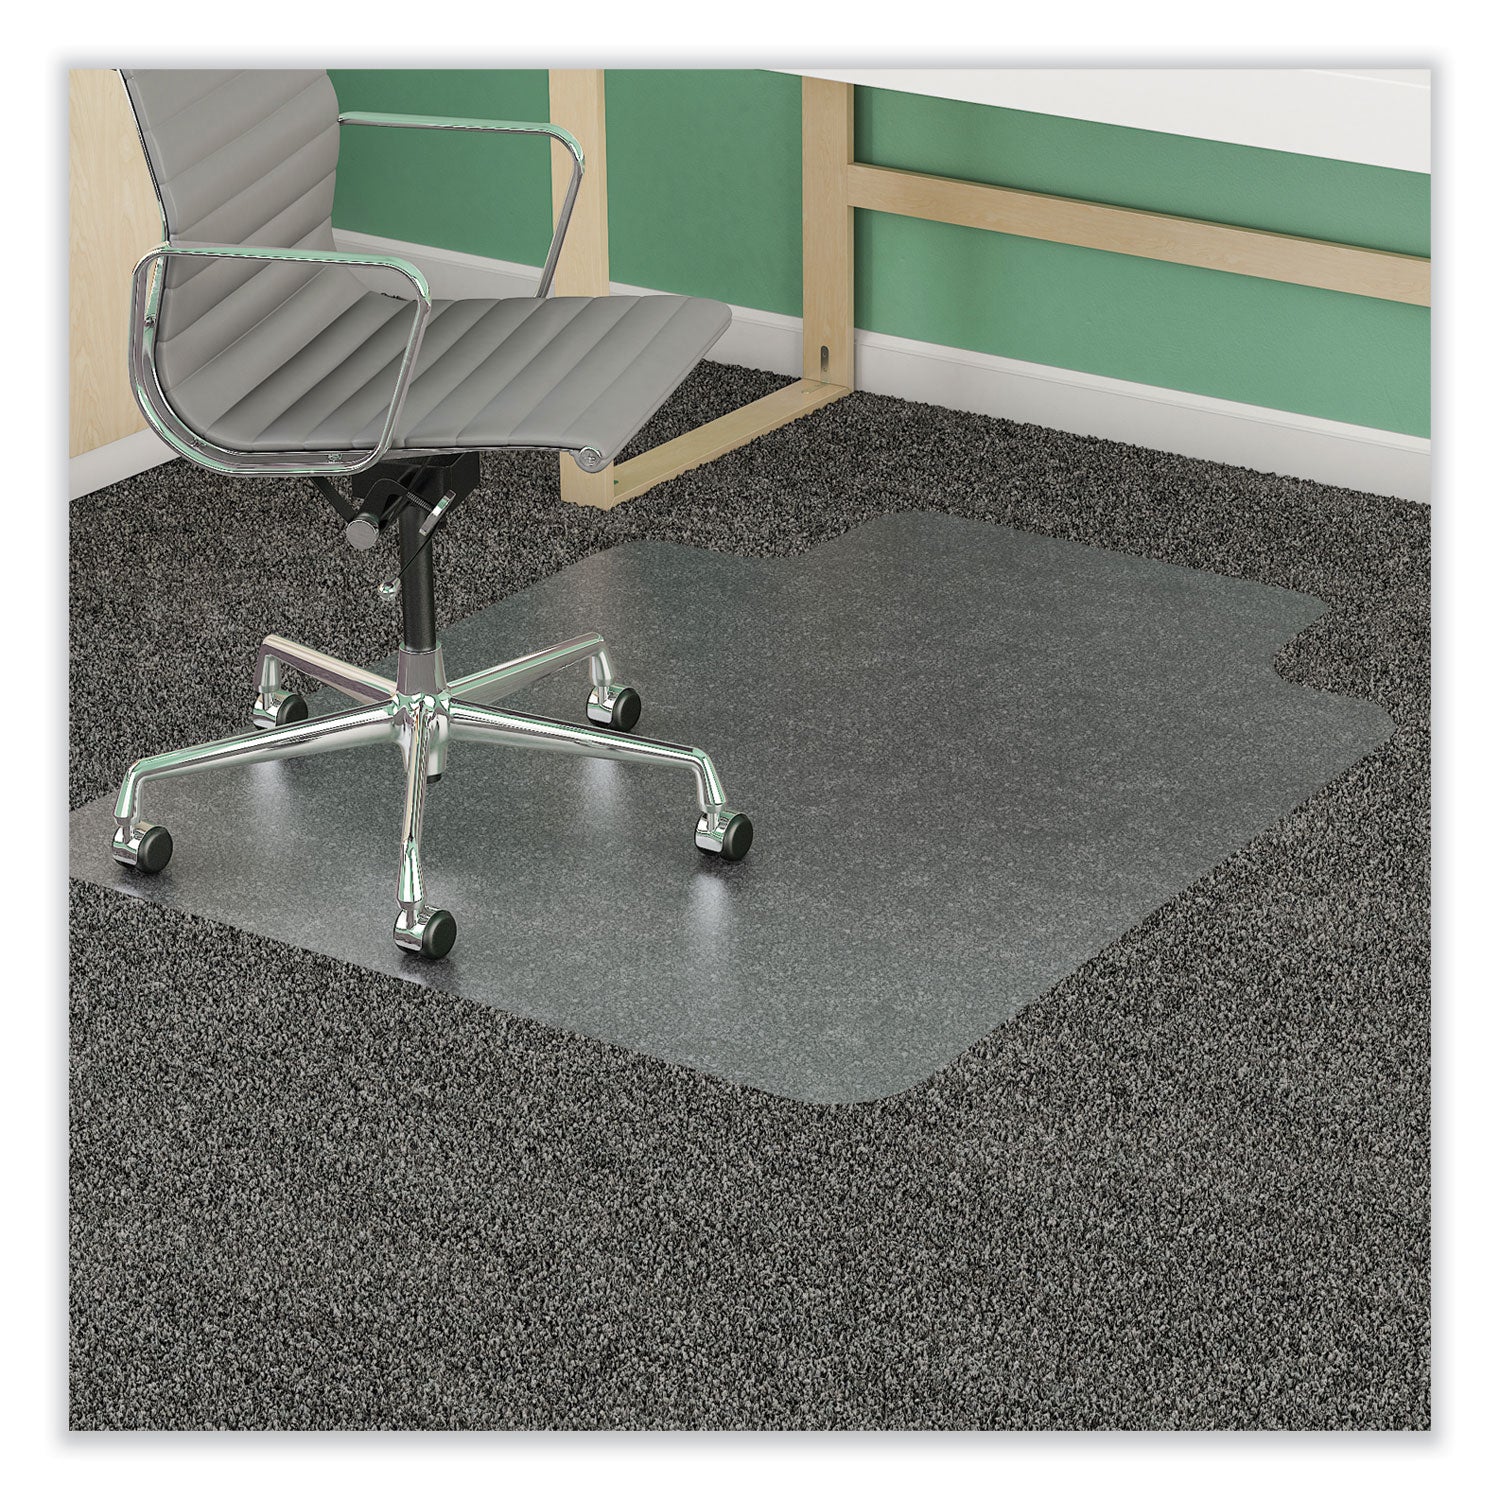 supermat-frequent-use-chair-mat-for-medium-pile-carpet-46-x-60-wide-lipped-clear_defcm14432f - 2